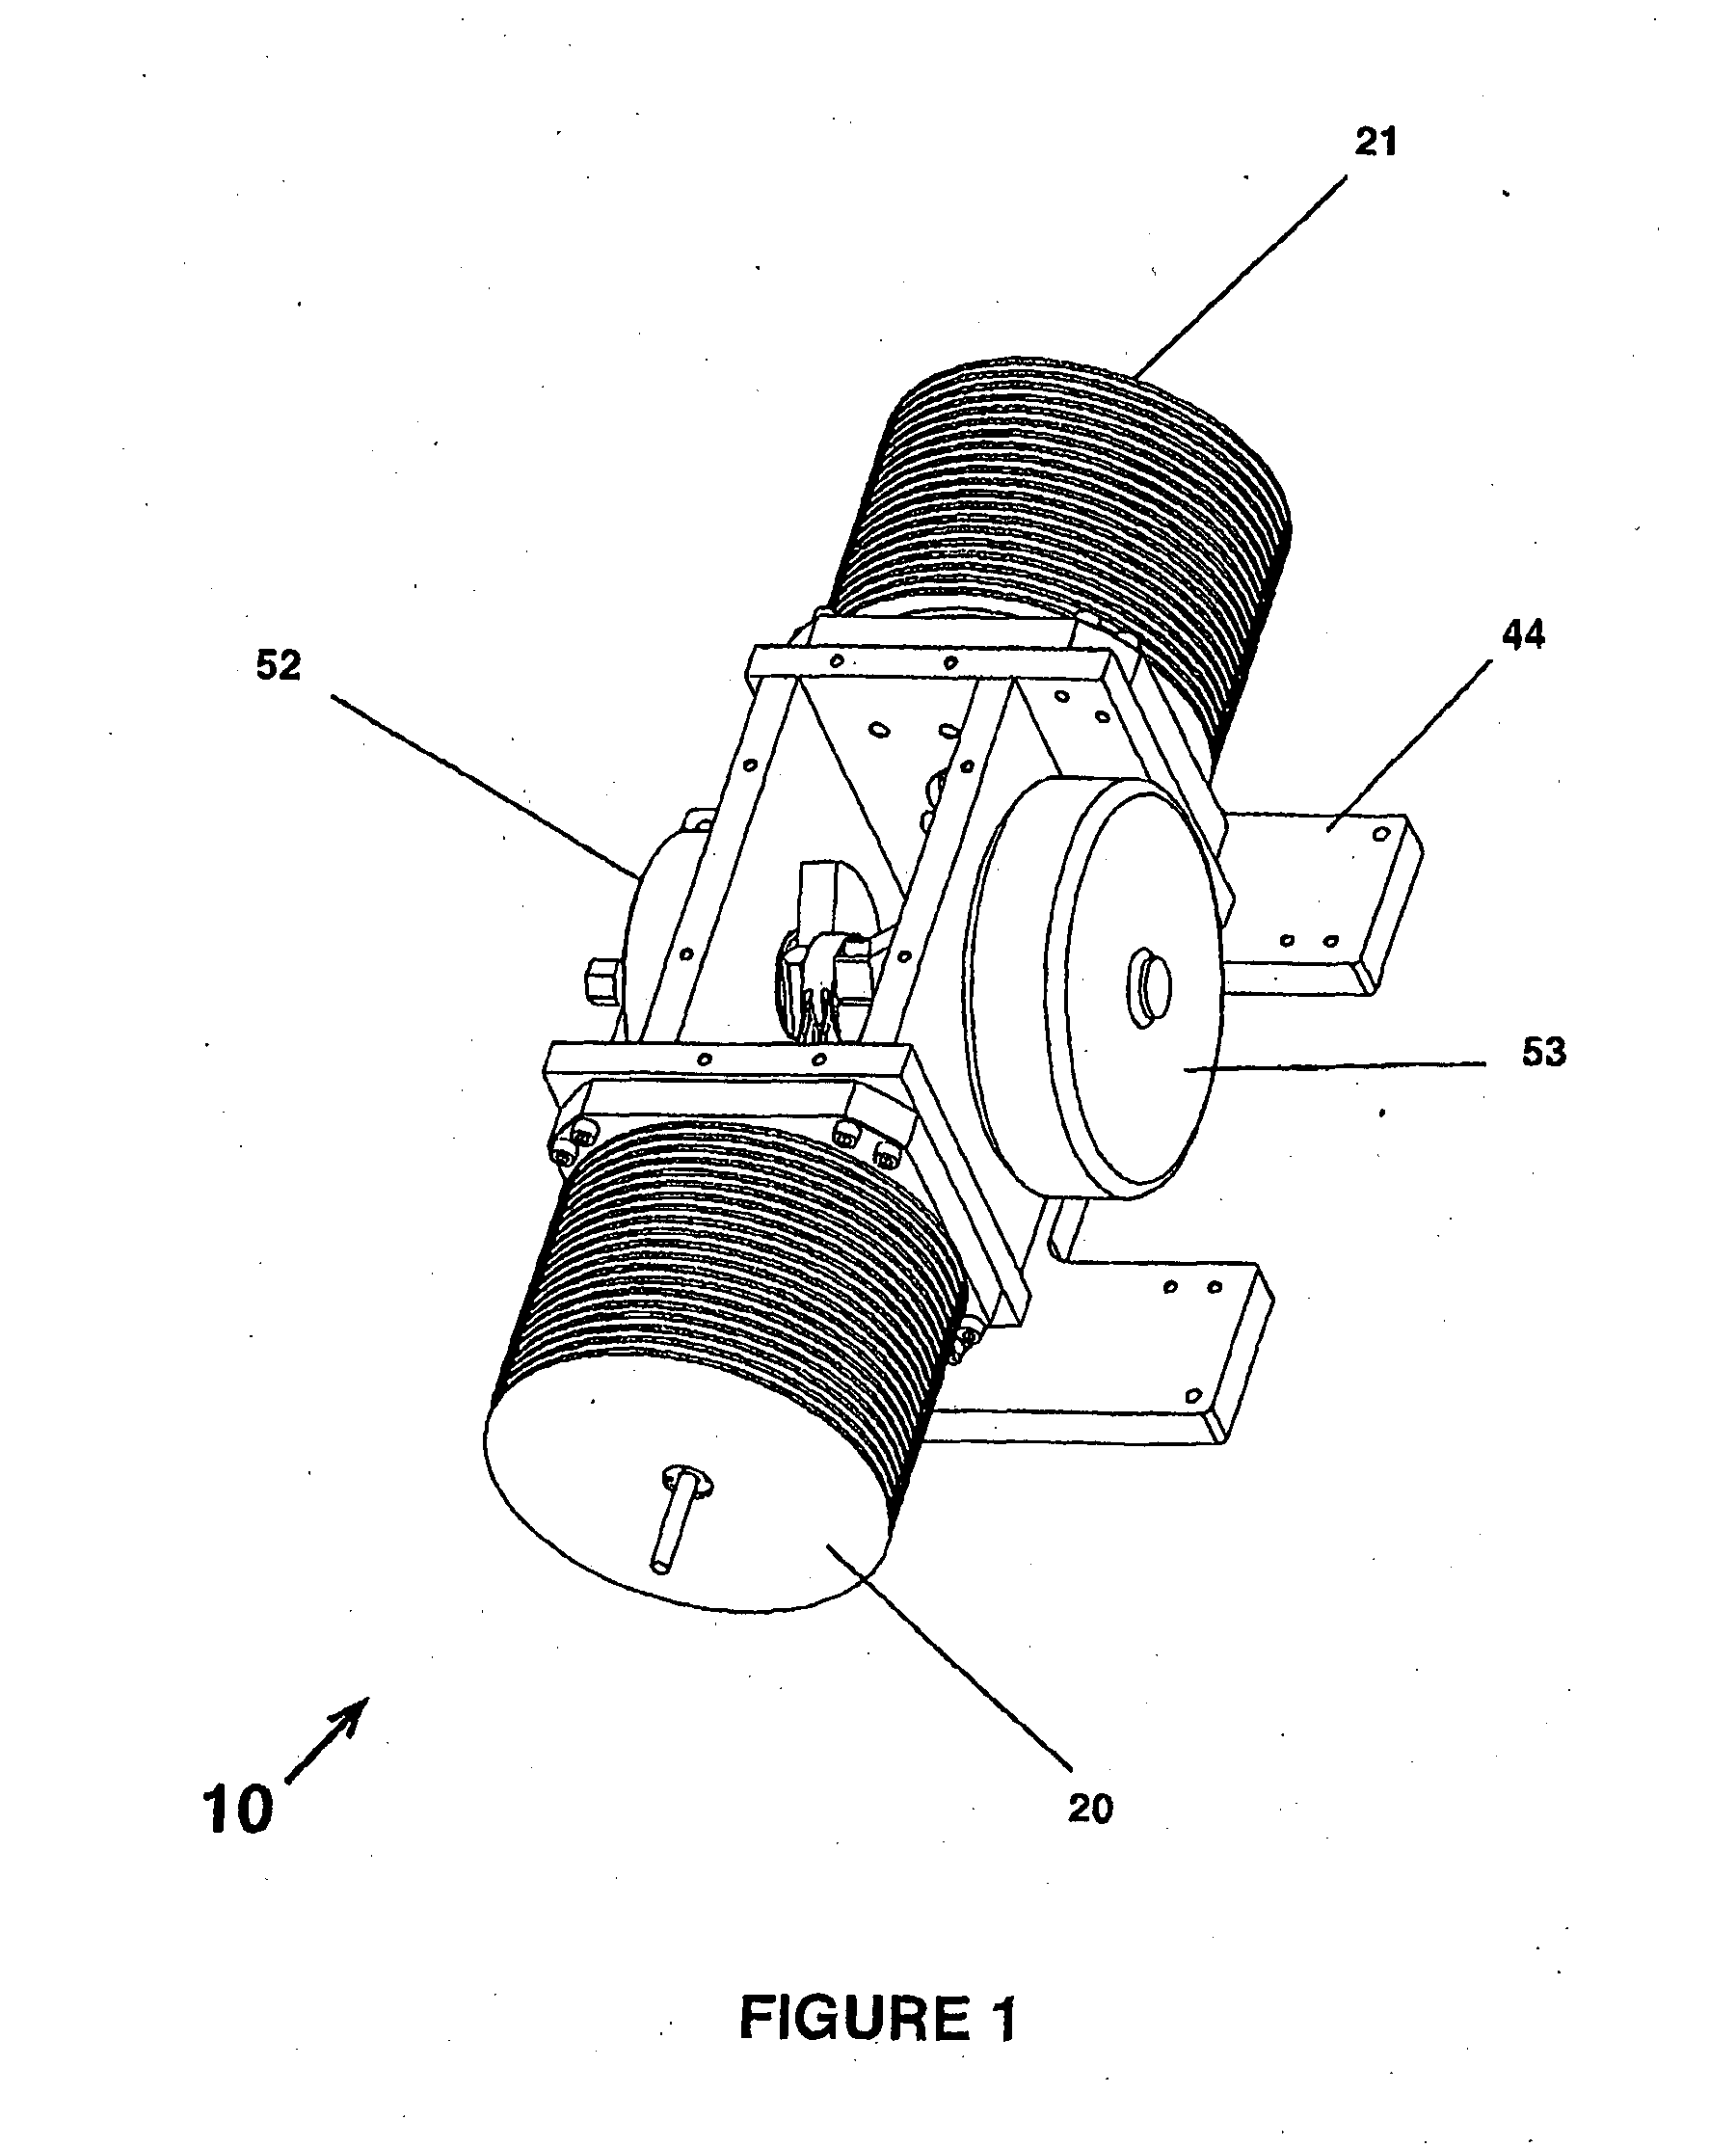 Method and Apparatus for Converting Between Electrical and Mechanical Energy